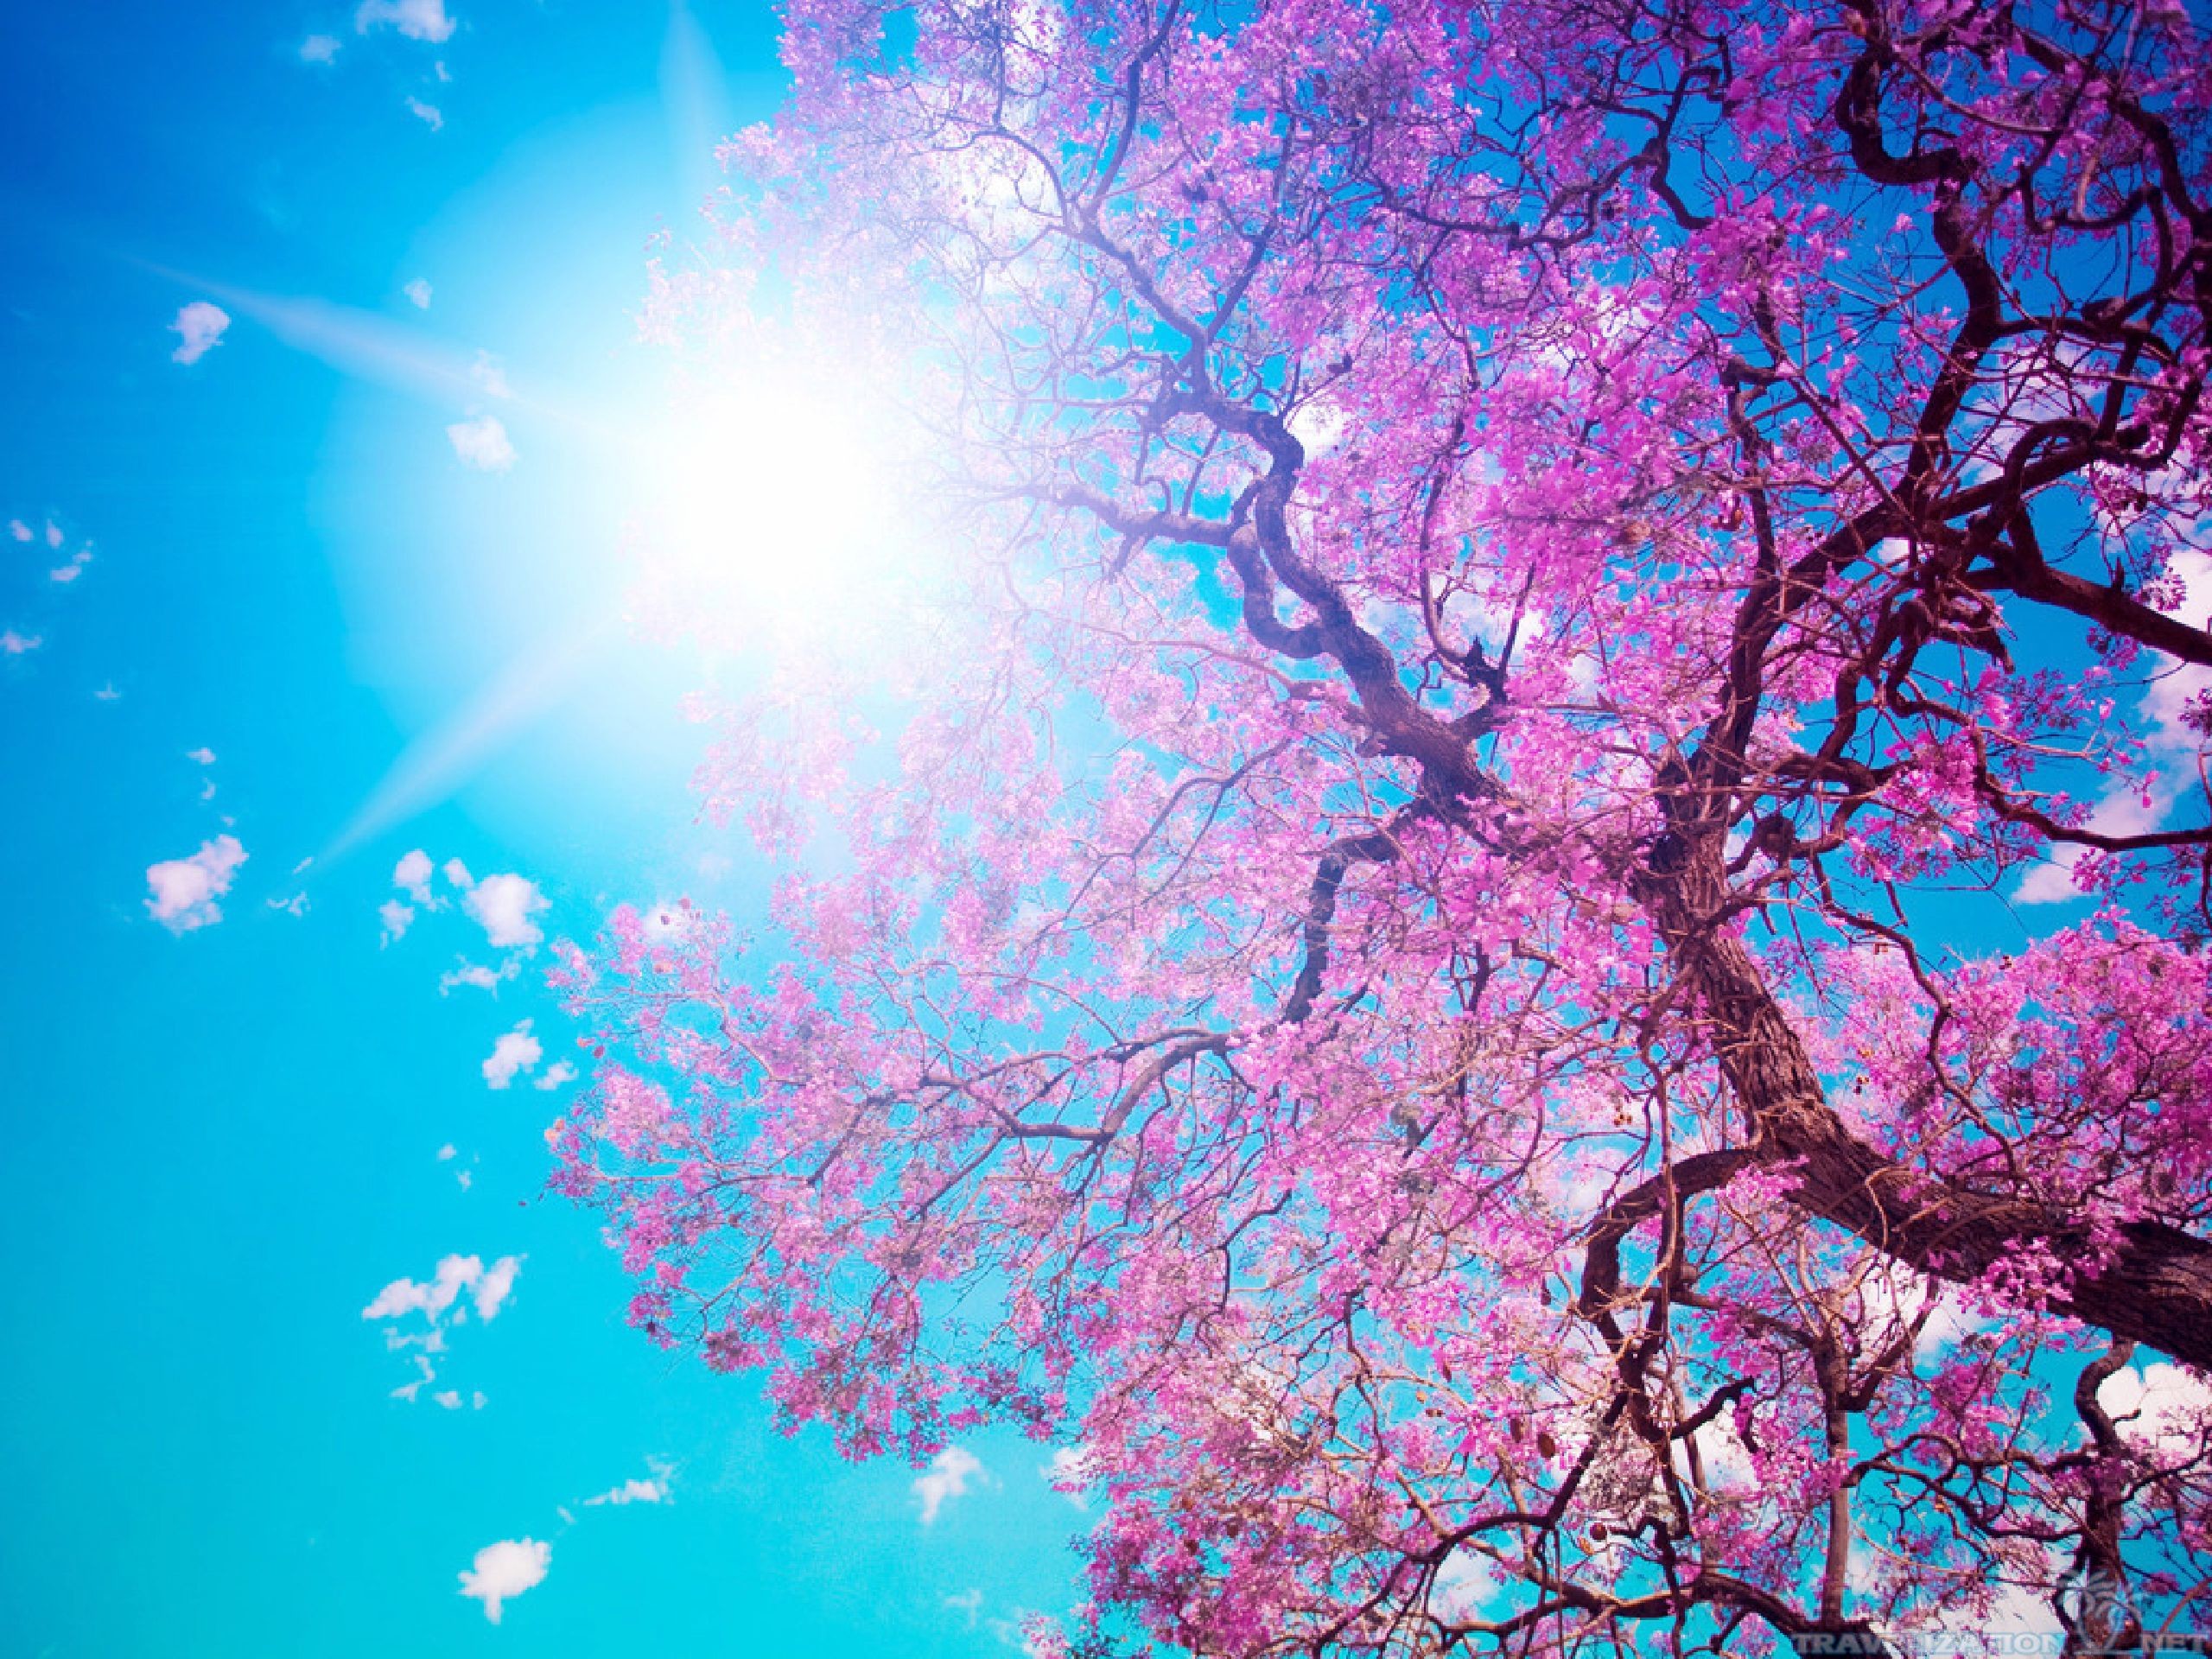 You Can Find Beautiful Tree Wallpapers In Many Resolution - Nike Sb Hd - HD Wallpaper 